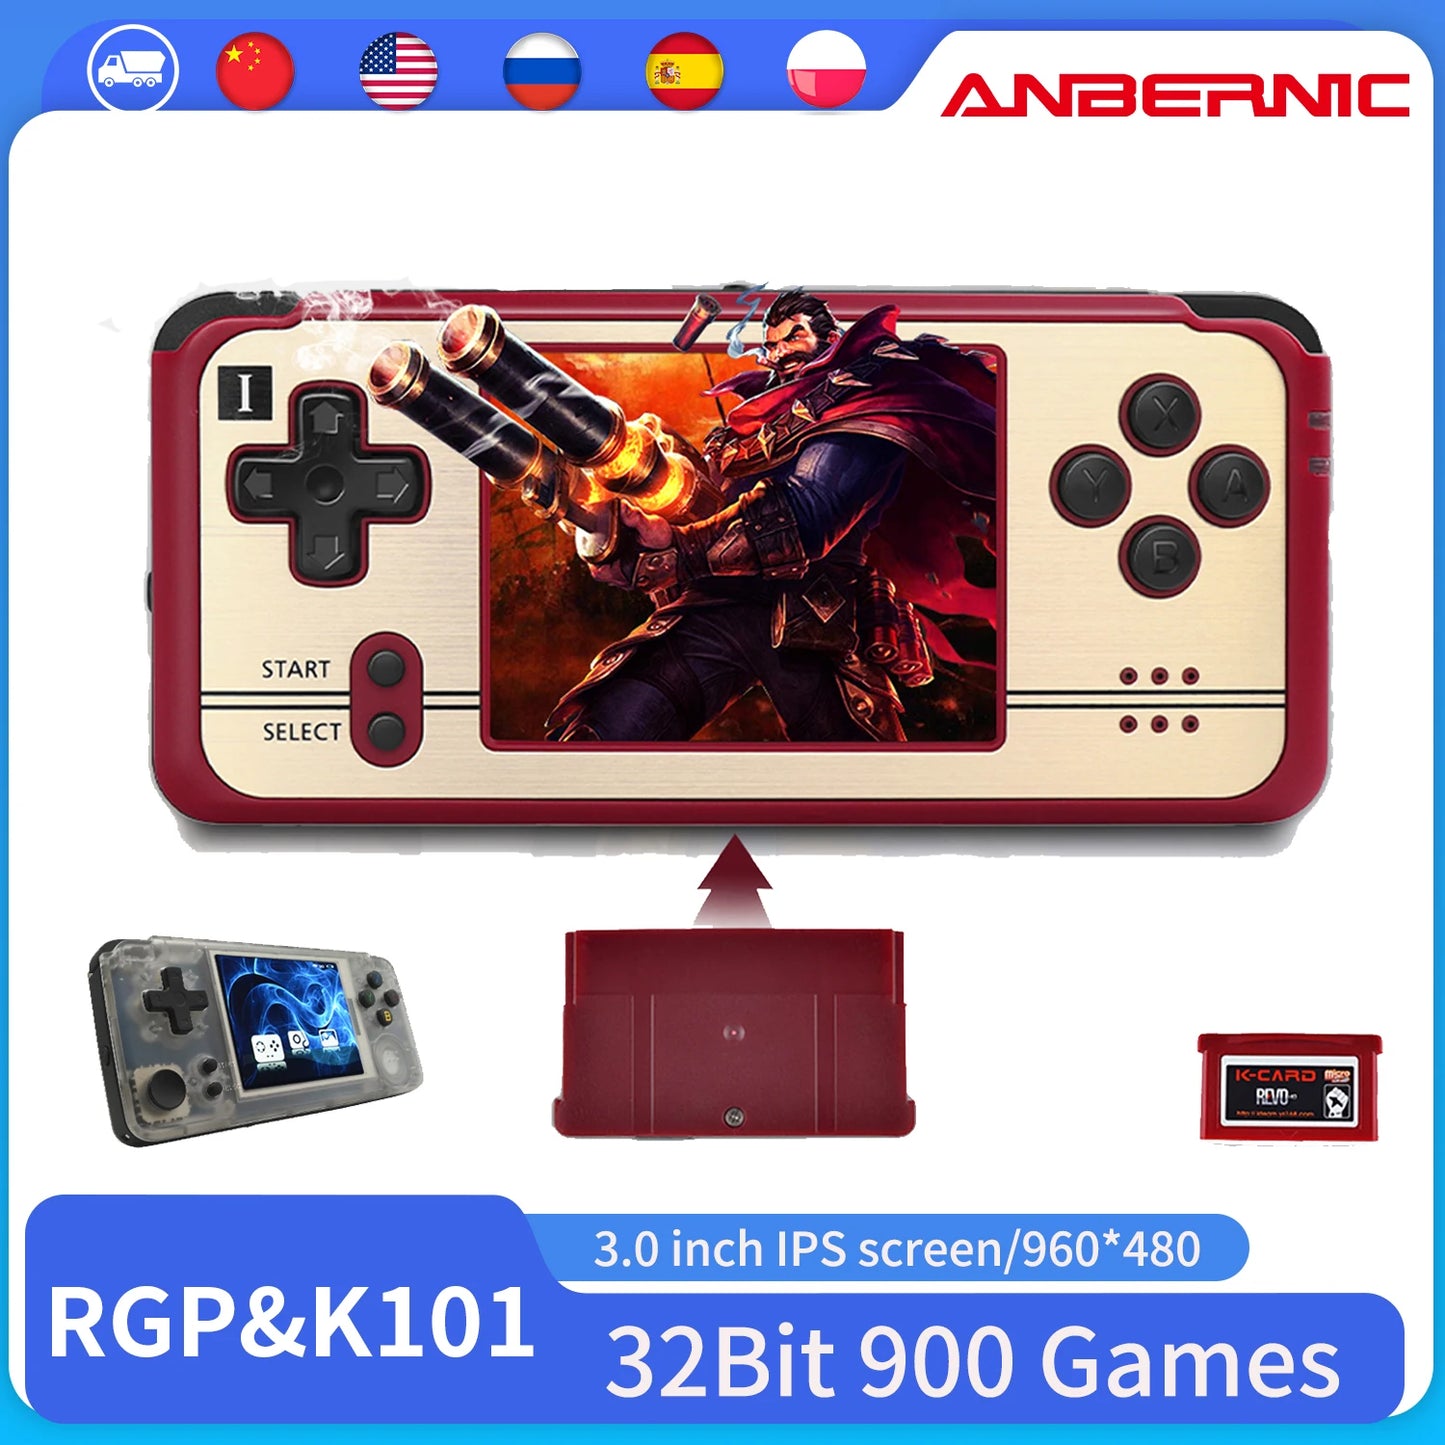 ANBERNIC NEW K101 Plus Handheld Game Player Retro Game 3 inch LCD Screen Video Game Console 32Bit 900 Games G BA Support Console